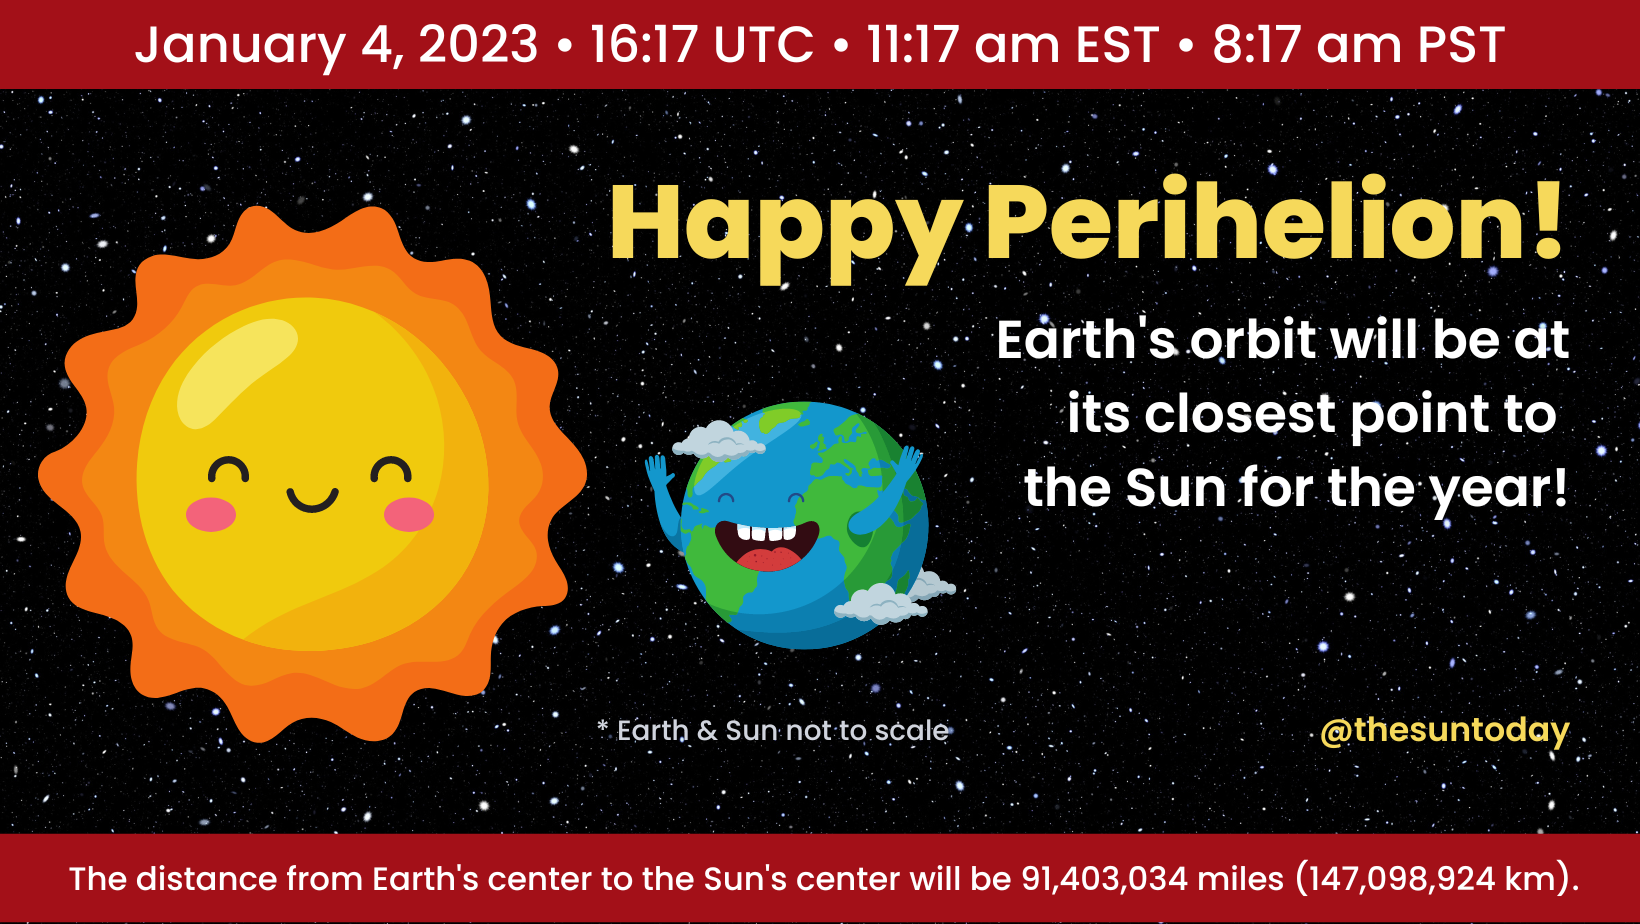 On January 4, 2023, at 16:17 UTC (11:17 a.m. EST or 8:17 a.m. PST), Earth's orbit will be at our closest point to the Sun for the year.